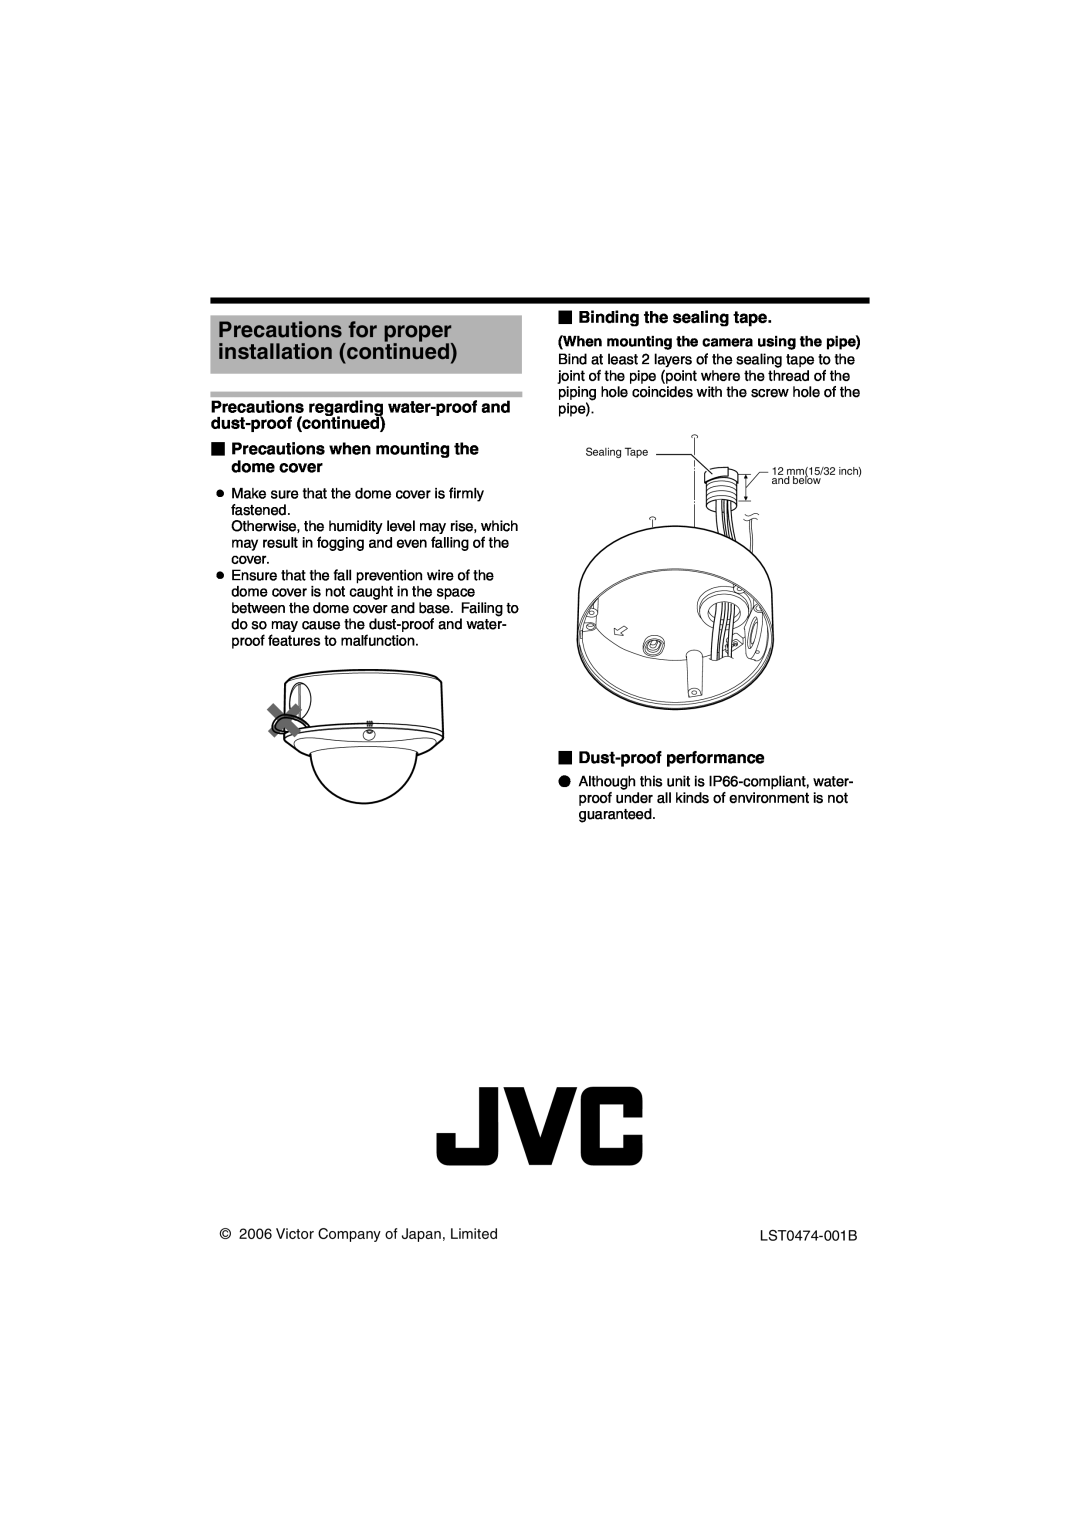 JVC TK-C215VP12 Precautions for proper installation continued, Precautions regarding water-proof and dust-proof continued 